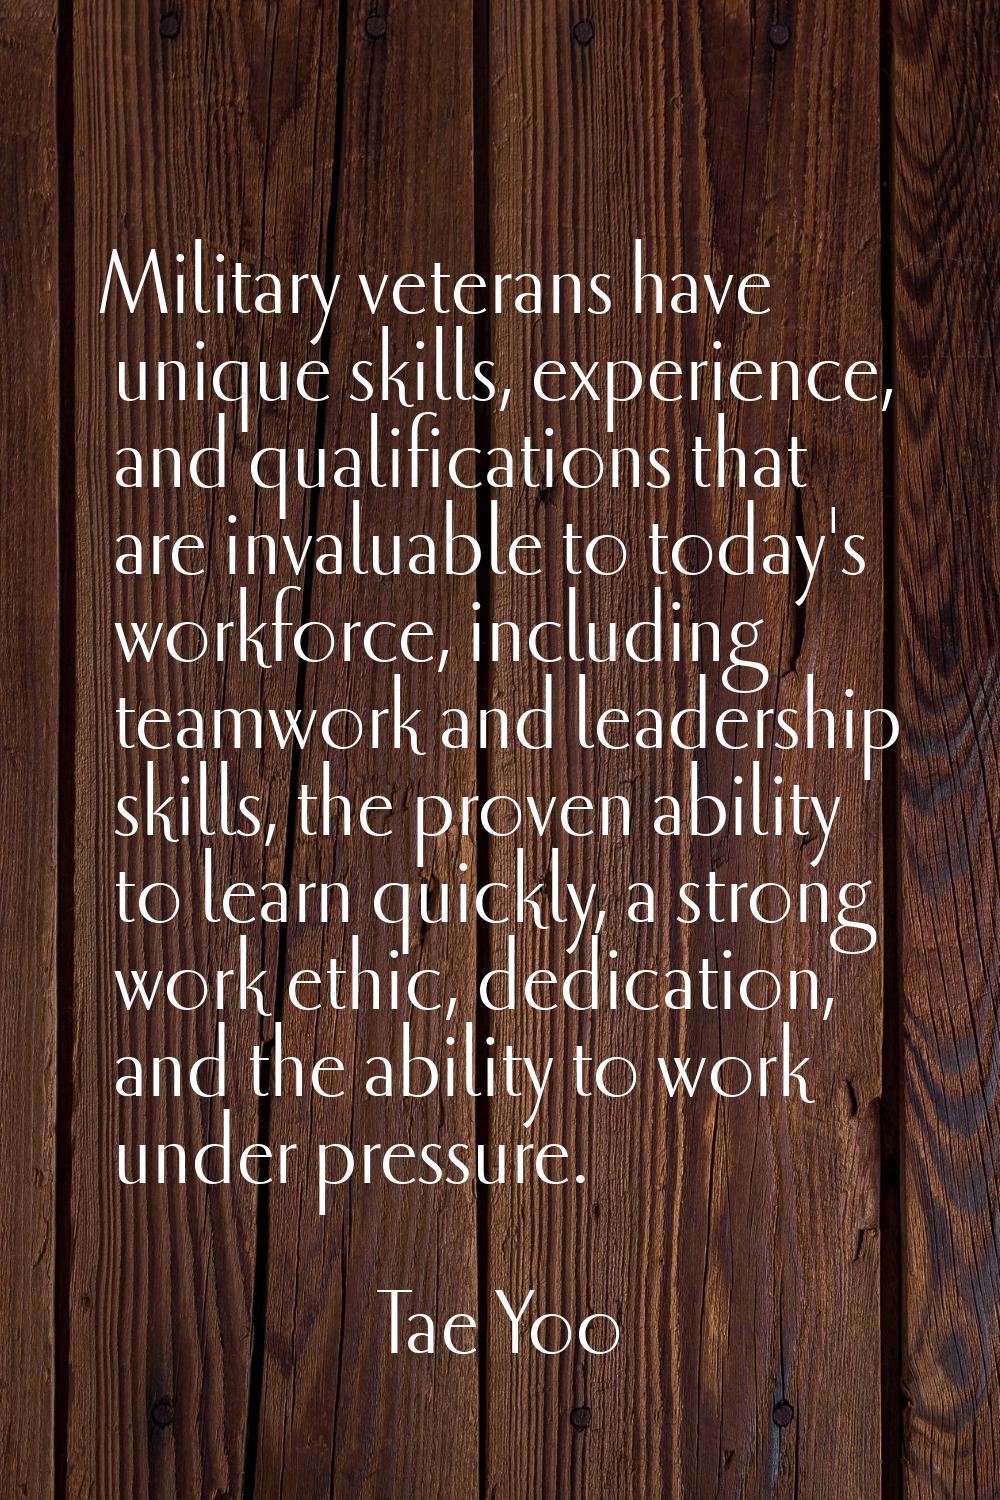 Military veterans have unique skills, experience, and qualifications that are invaluable to today's